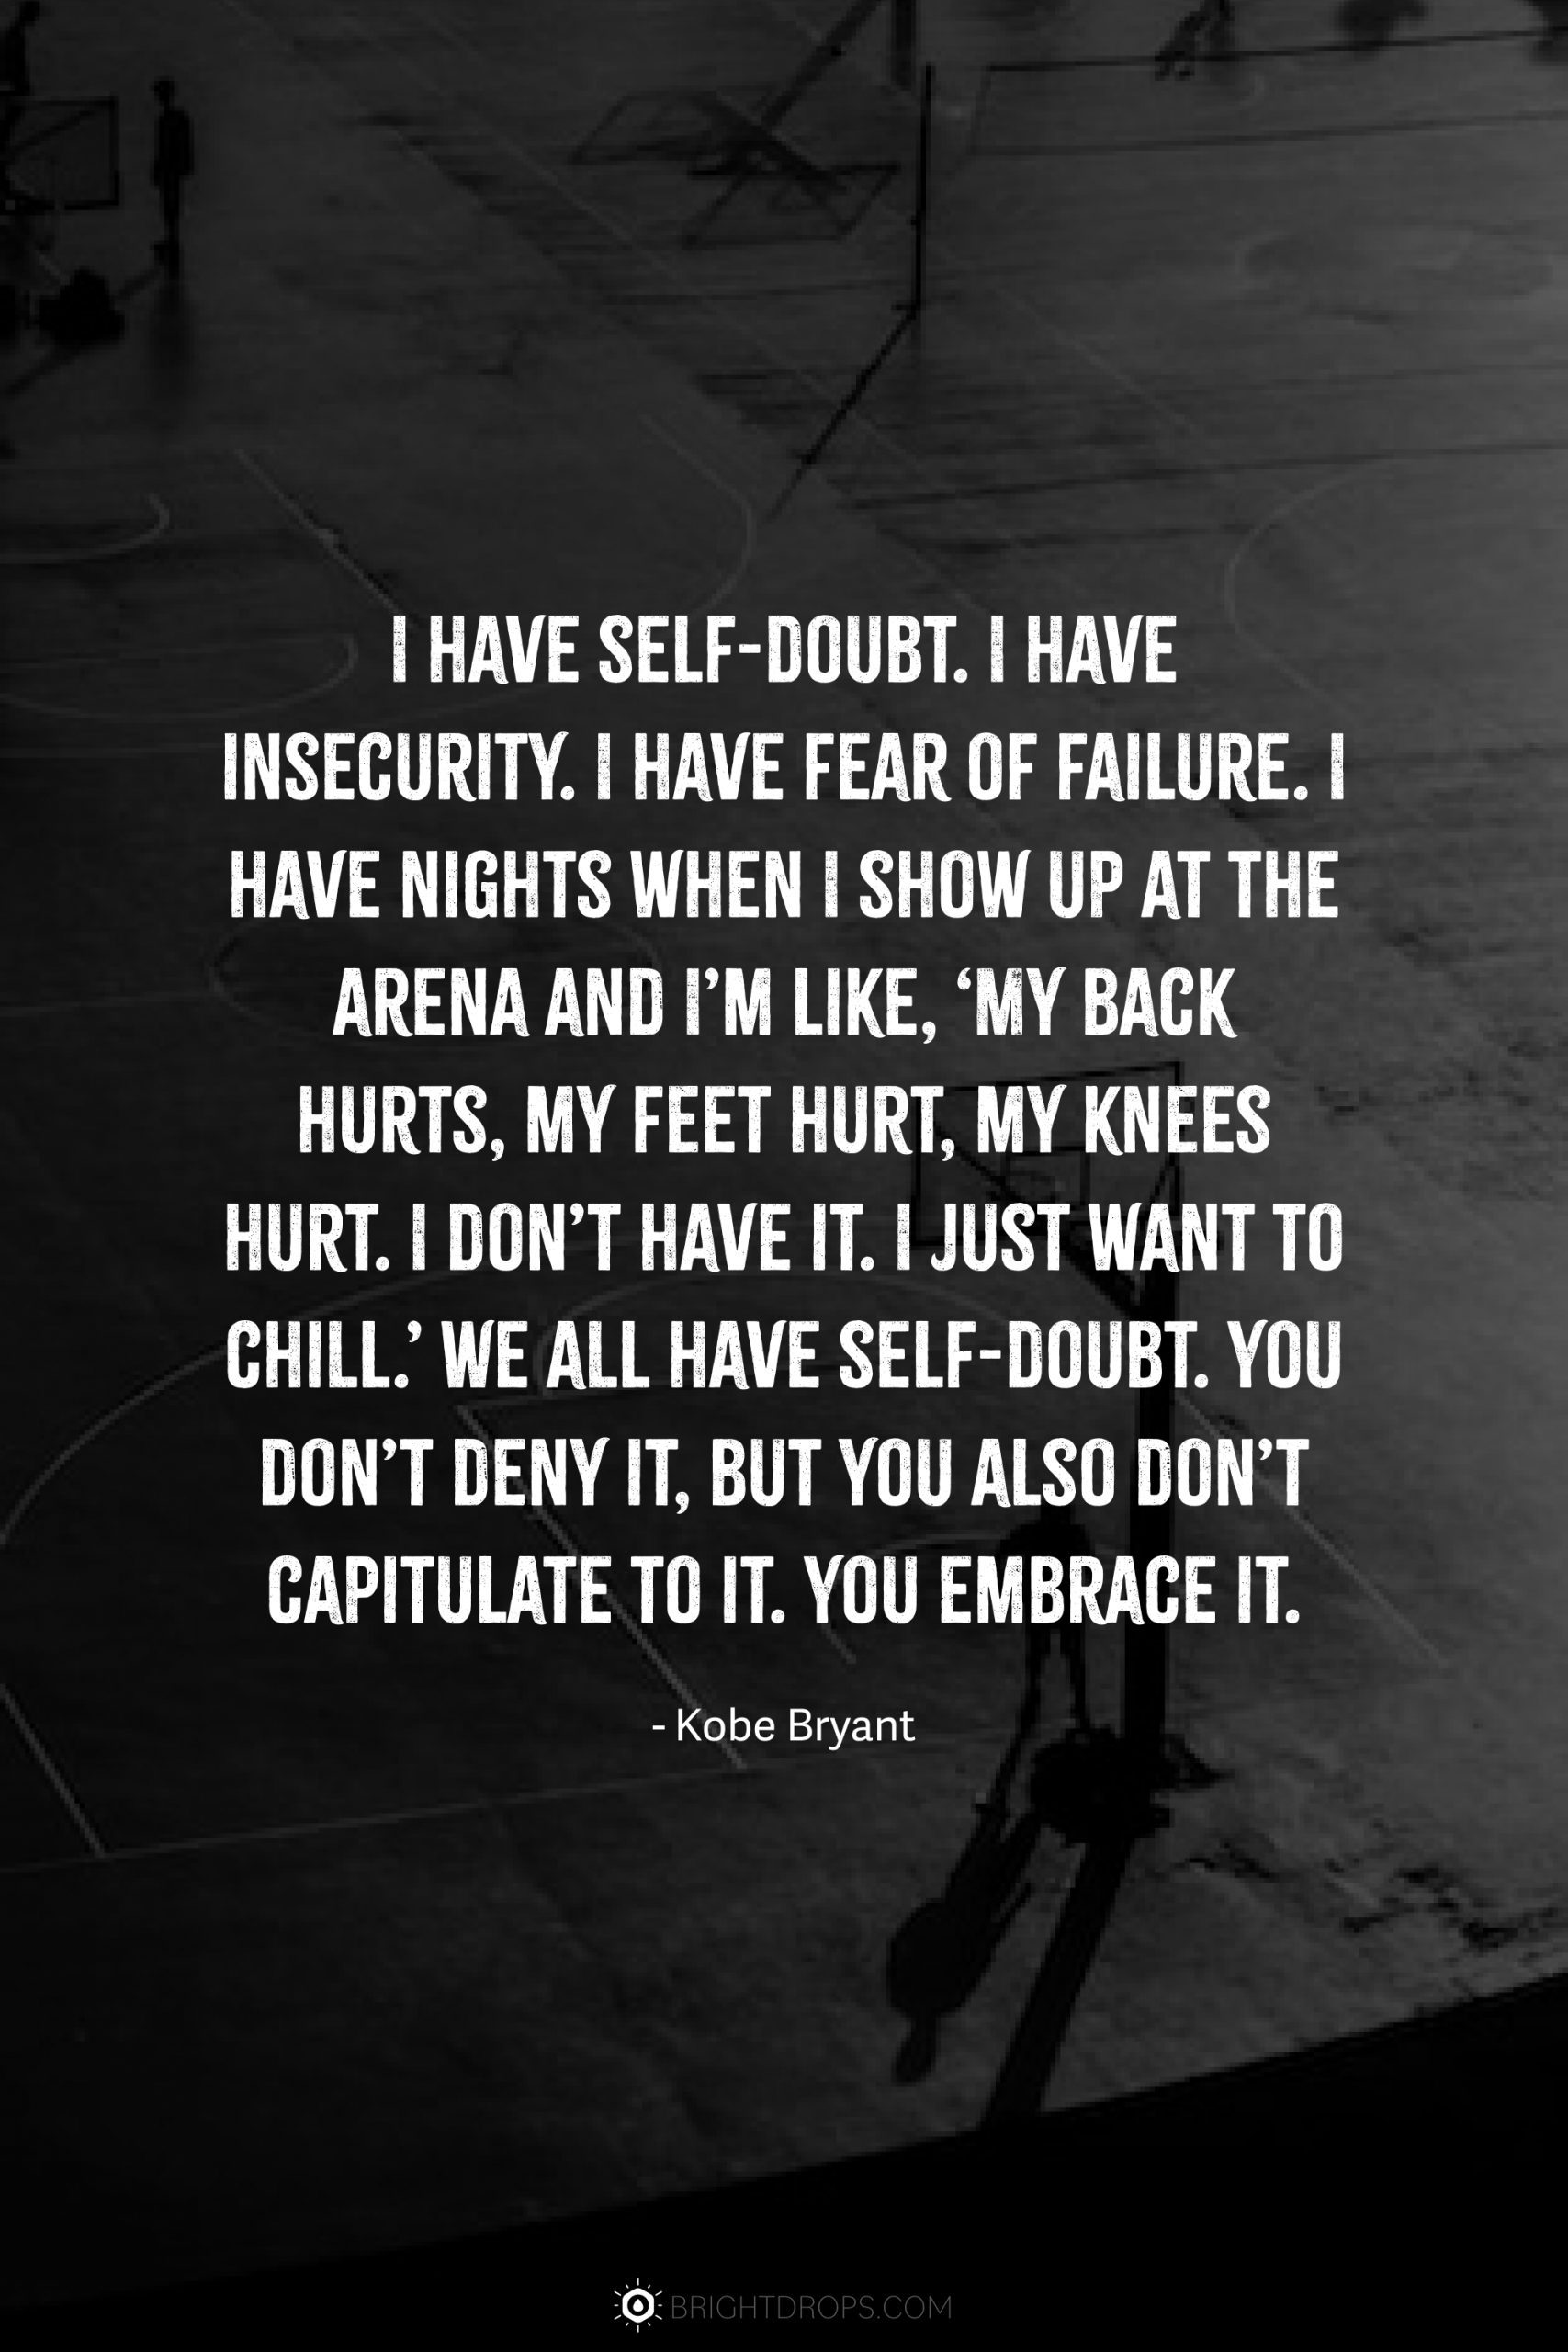 I have self-doubt. I have insecurity. I have fear of failure. I have nights when I show up at the arena and I’m like, ‘My back hurts, my feet hurt, my knees hurt. I don’t have it. I just want to chill.’ We all have self-doubt. You don’t deny it, but you also don’t capitulate to it. You embrace it.